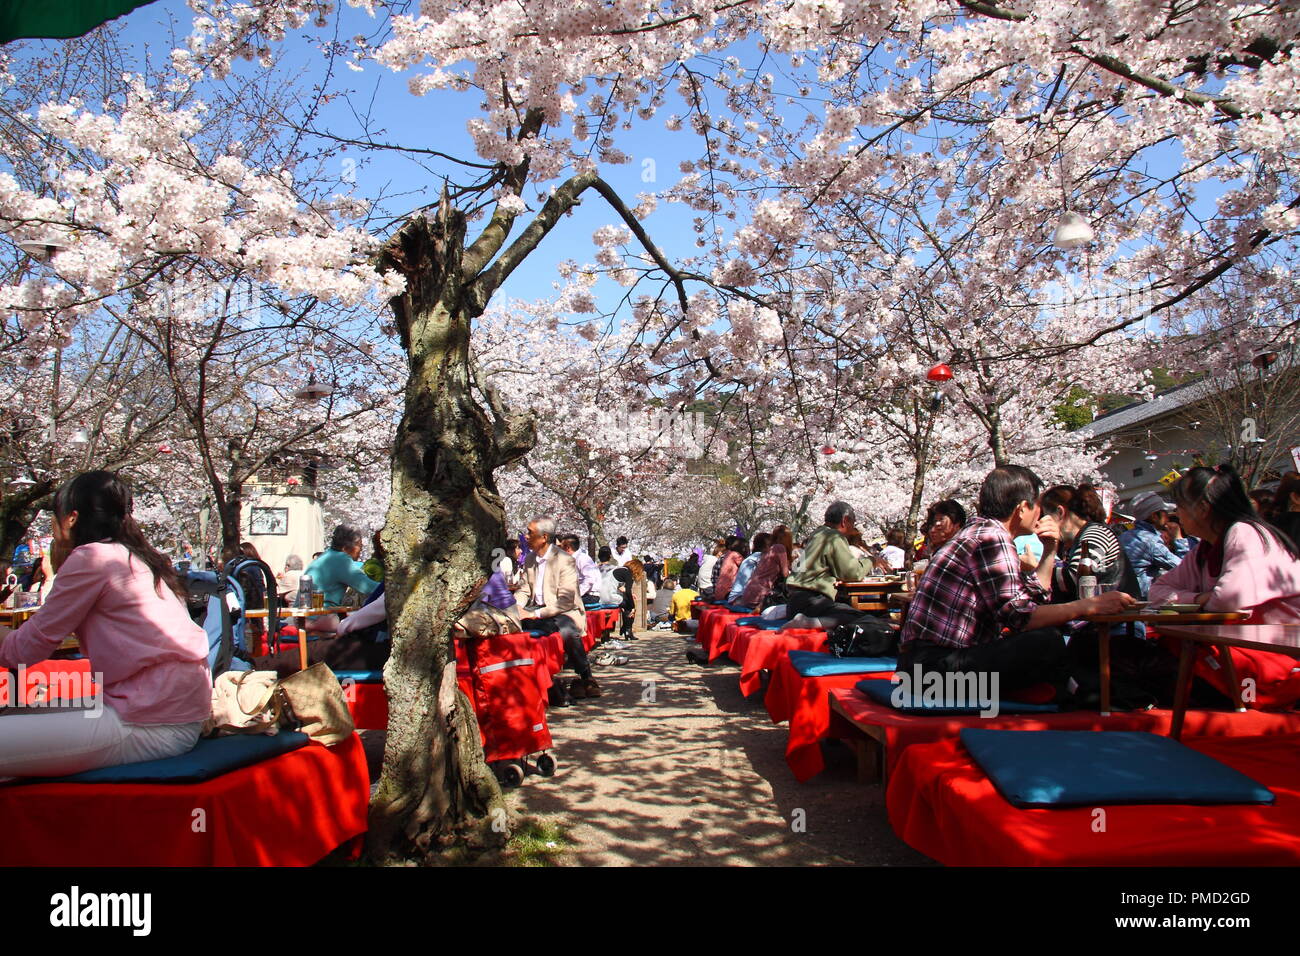 Japanese people gather in Maruyama Park in Kyoto, Japan to celebrate 'hanami', the Cherry blossom. Stock Photo